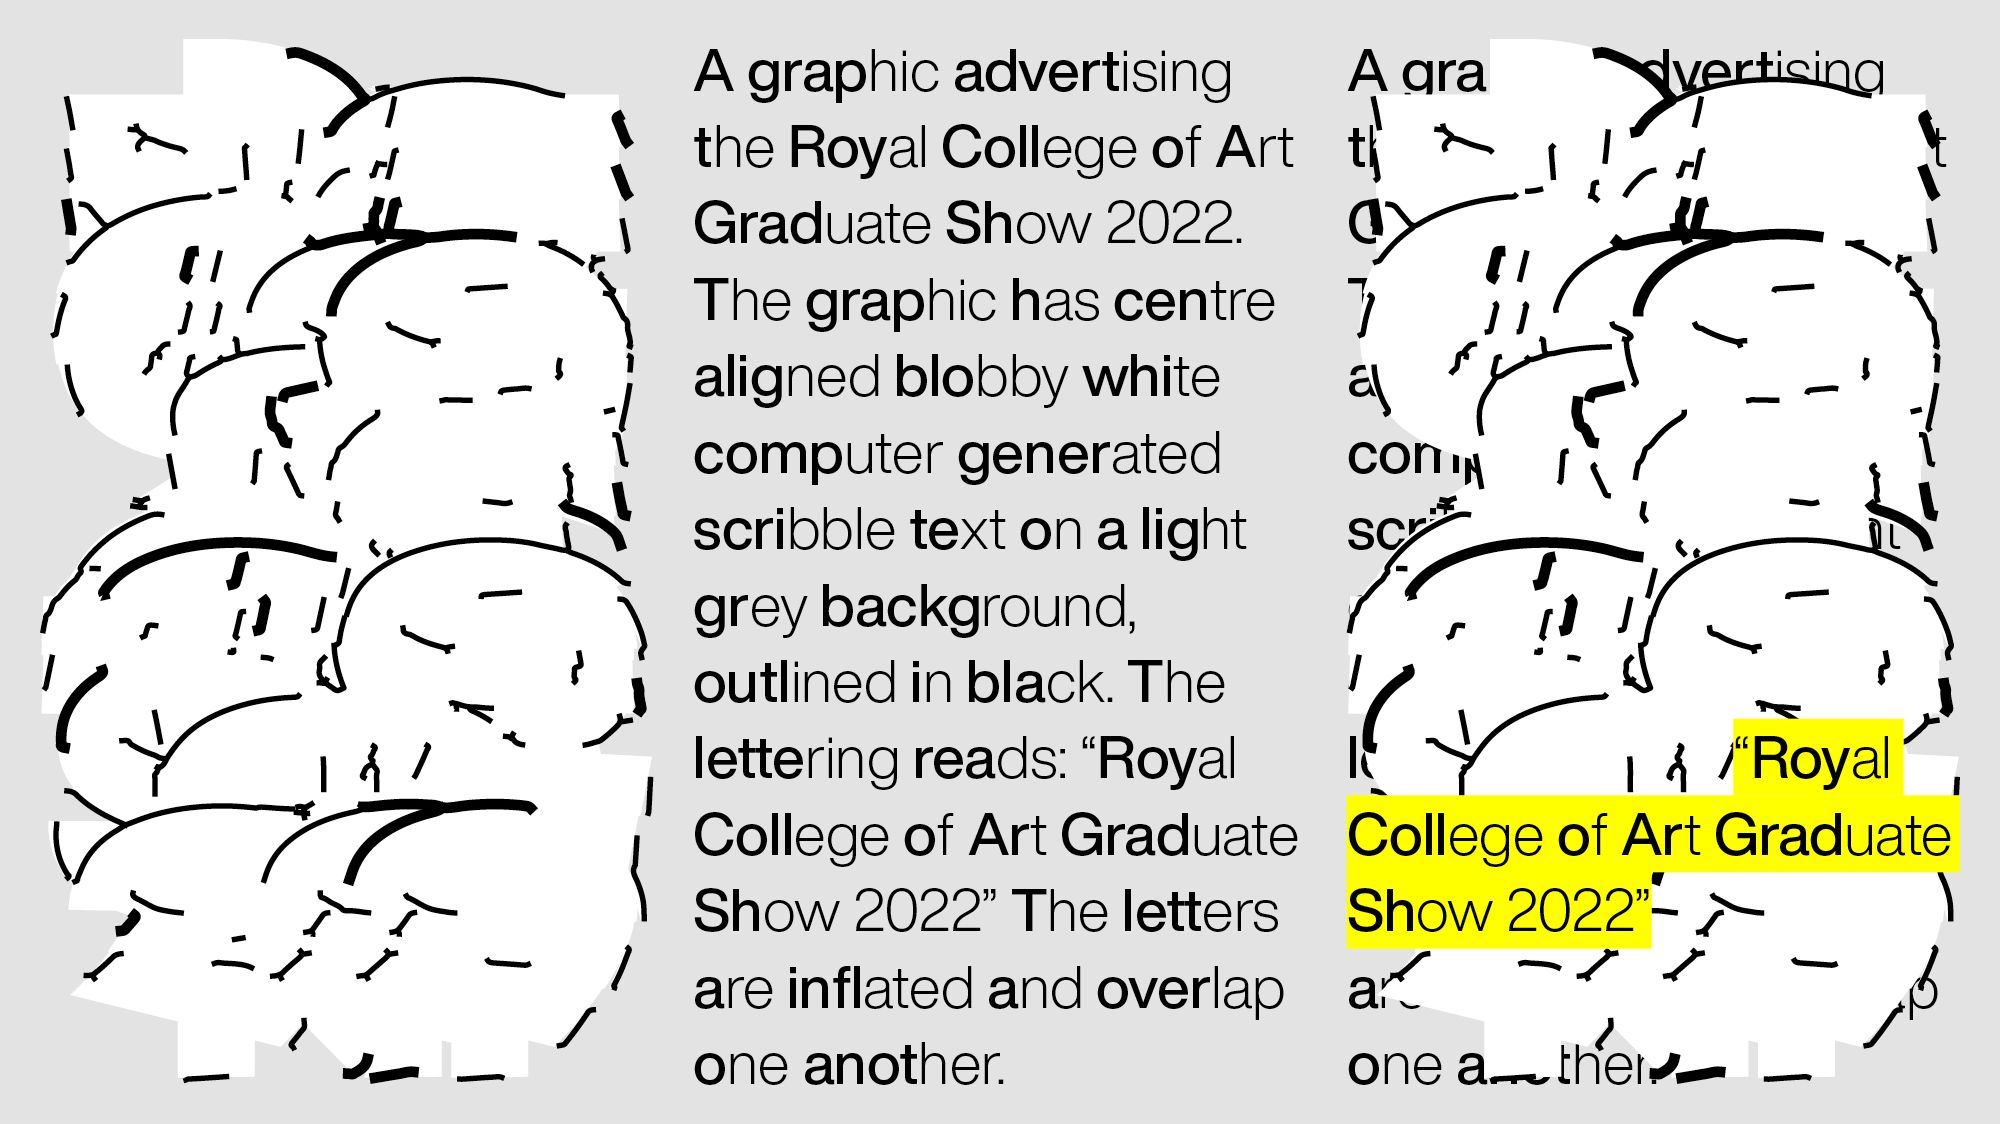 Three graphics on a light grey background (LtoR): White computer generated abstract letterforms.  Text reading: ‘A graphic advertising the Royal College of Art Graduate Show 2022. The graphic has centre aligned blobby white computer generated scribble text on a light grey background, outlined in black. The lettering reads: “Royal College of Art Graduate Show 2022” The letters are inflated and overlap one another’. These two graphics overlapped and yellow highlighted text reading: “Royal College of Art Graduate Show 2022”.